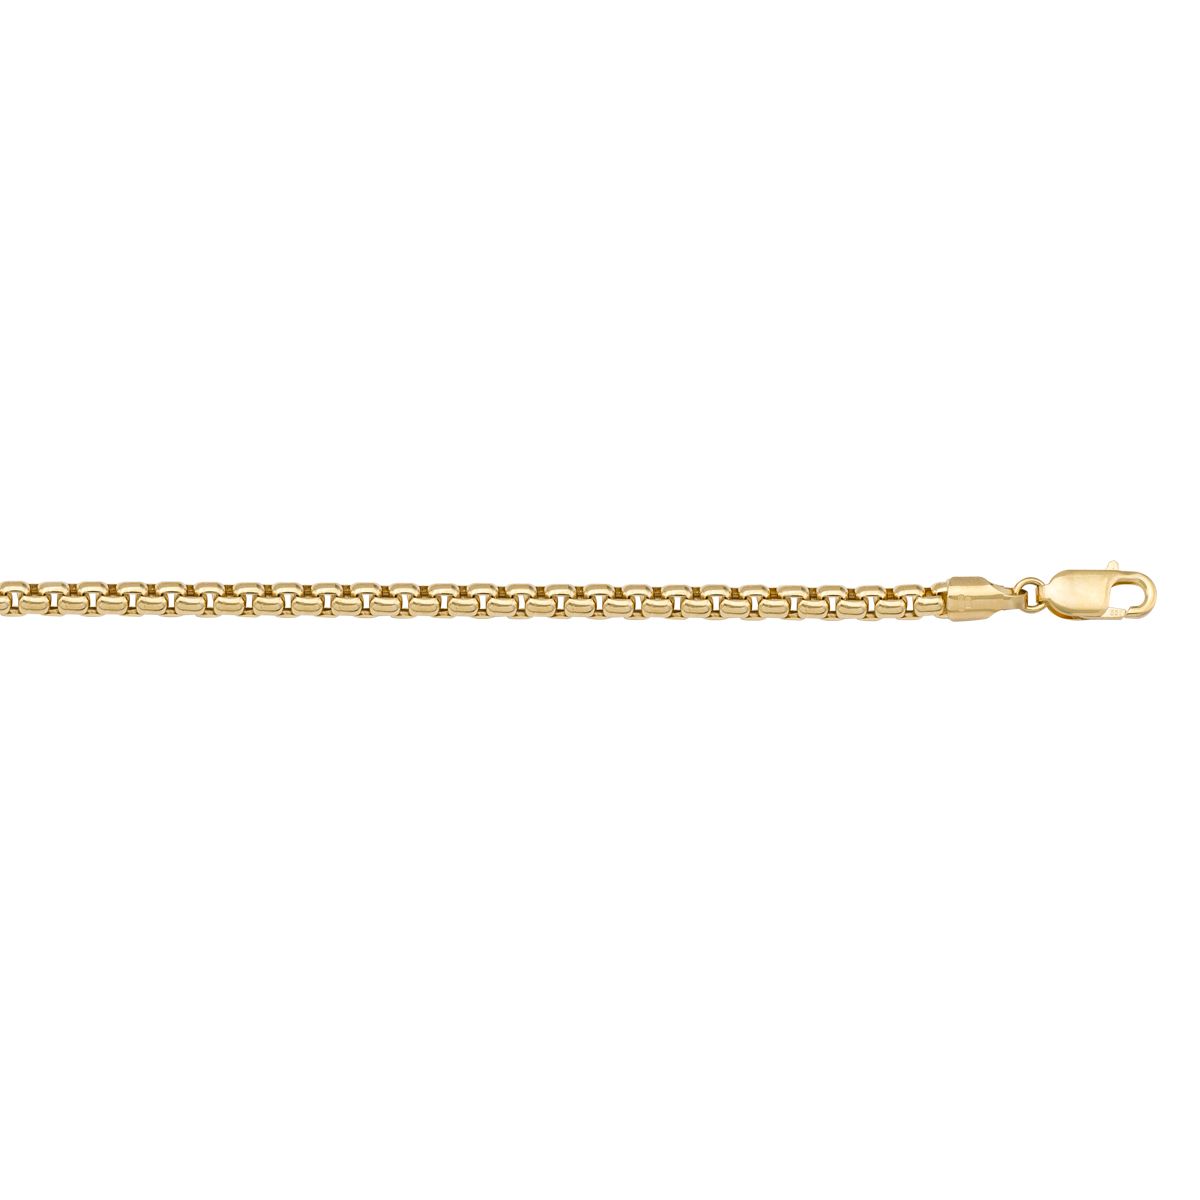 CBX02, Gold Chain, Hollow Box, Yellow Gold